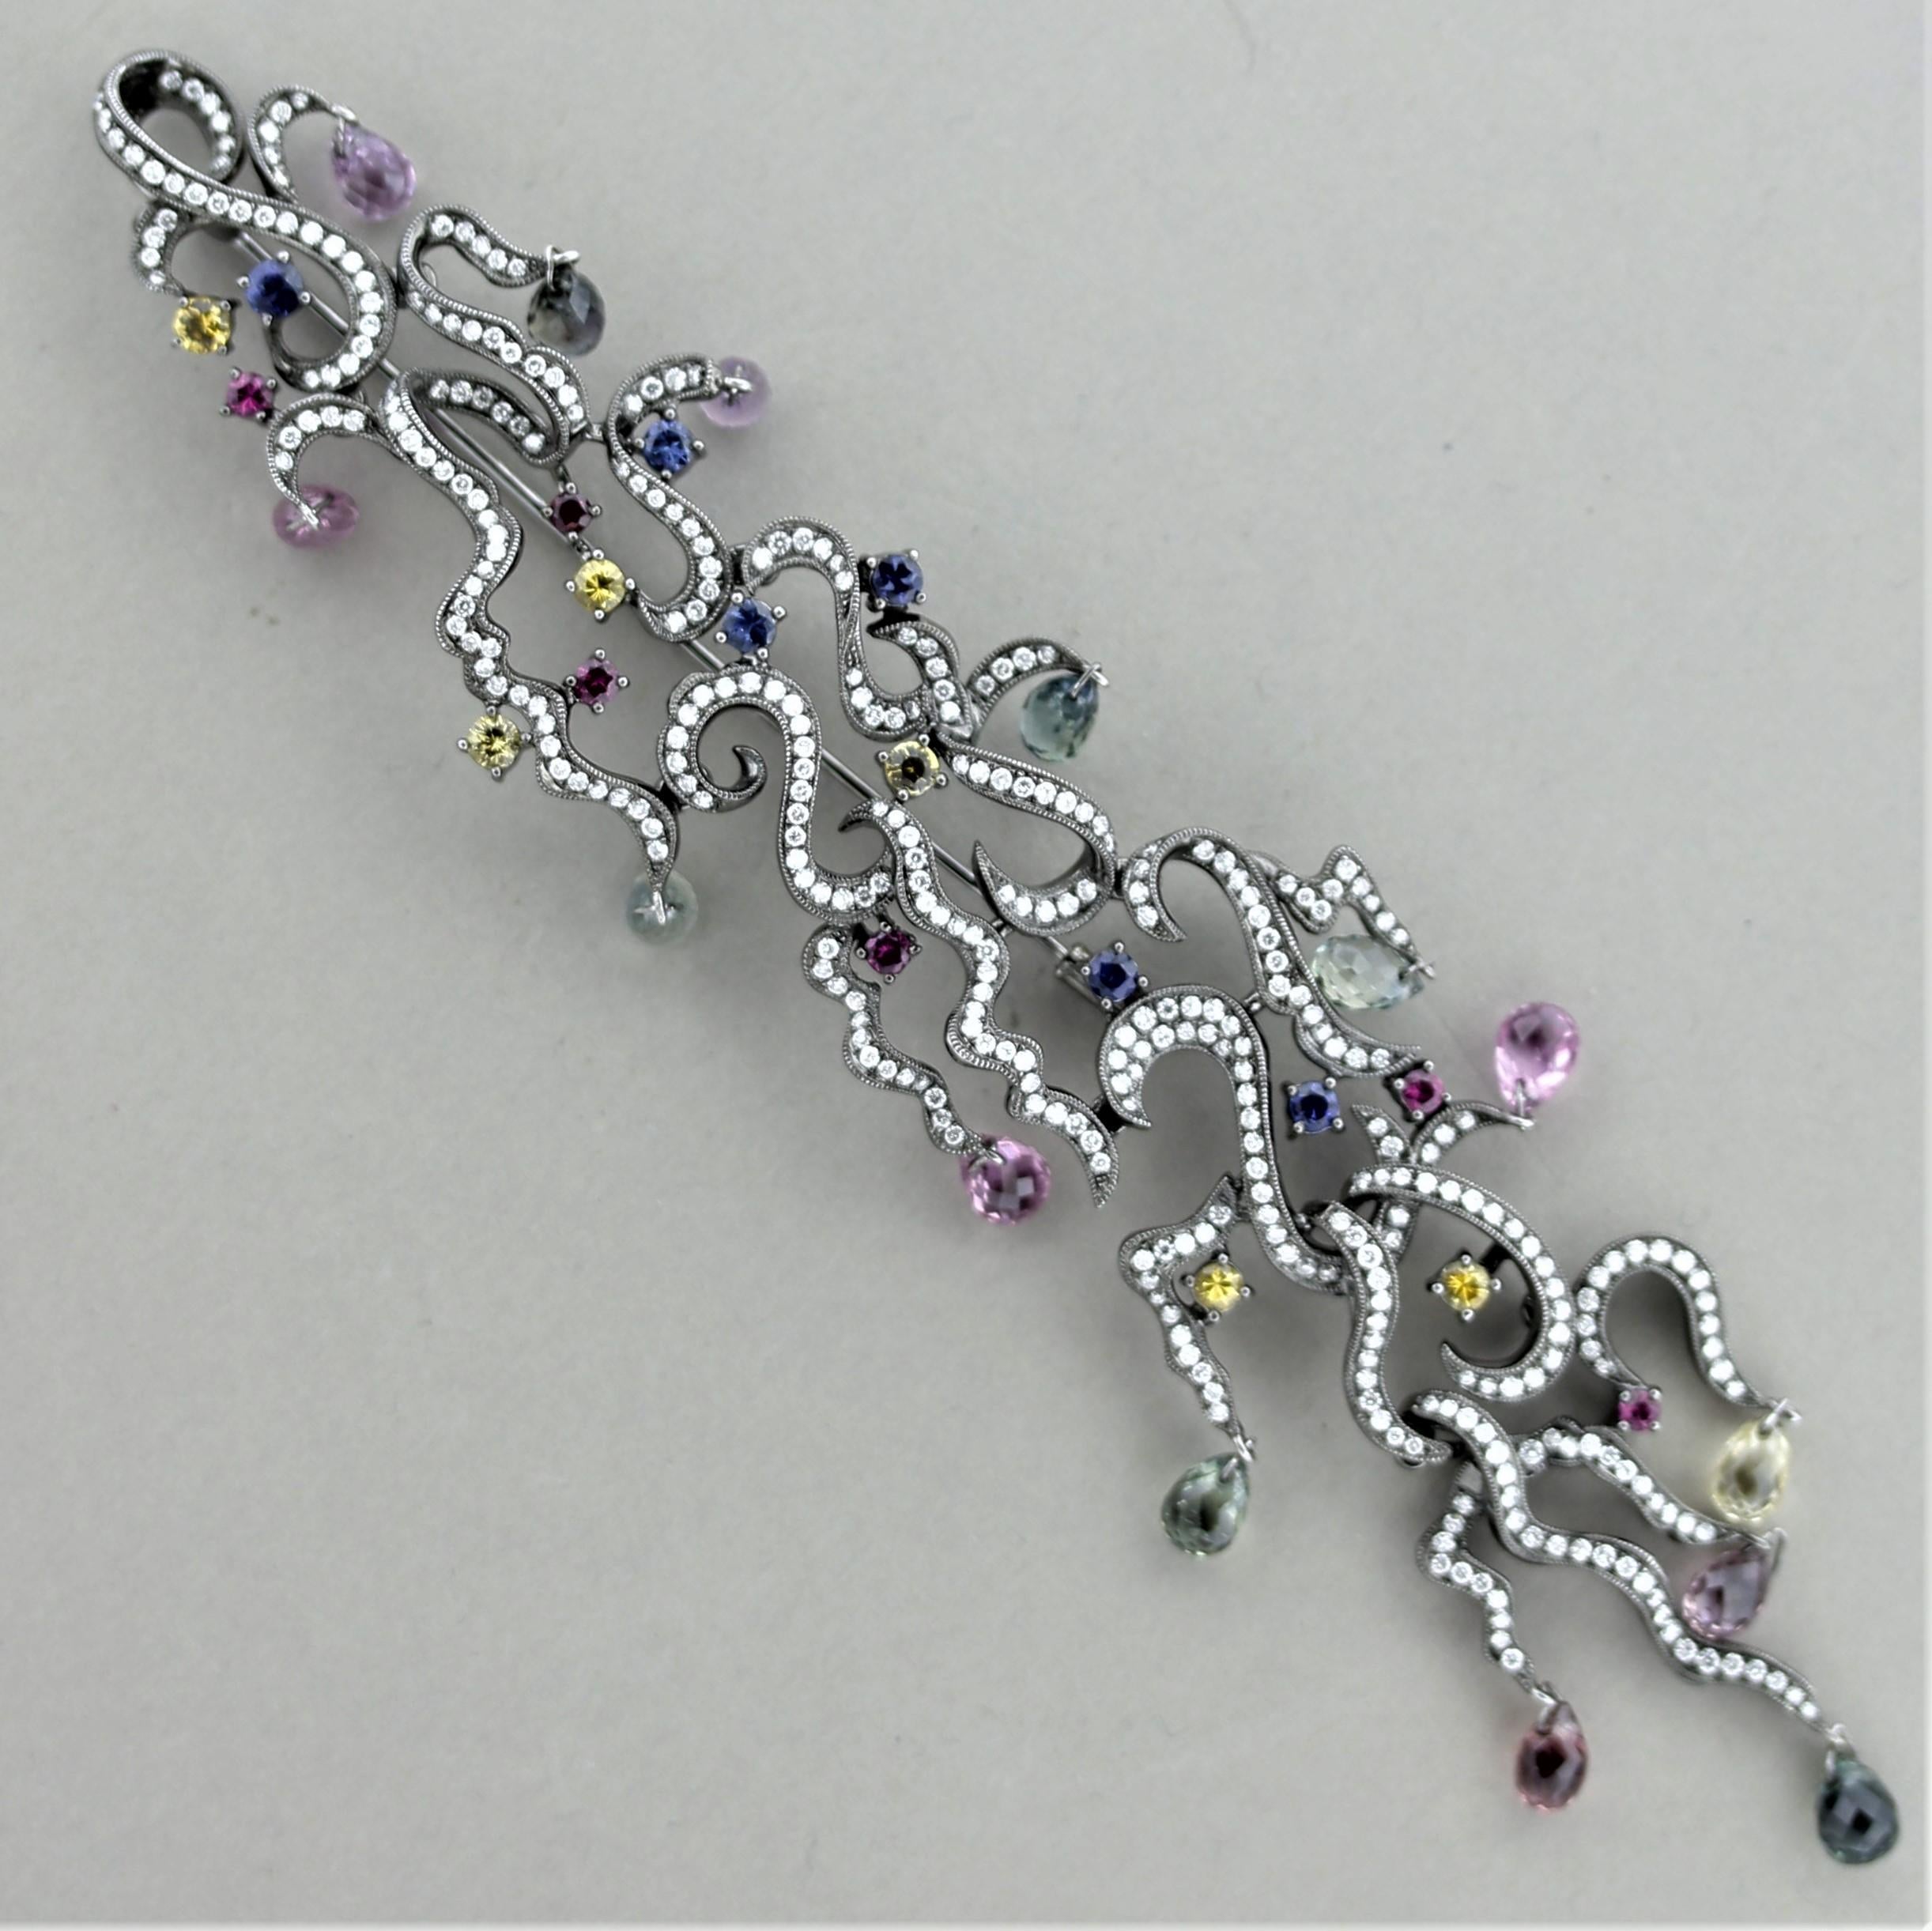 Simply stunning and exceptional, as much a piece of fine art as a piece of jewelry. The brooch features 16 carats of bright sapphires in just about every color and are cut as rounds and beautiful briolettes which drop and dangle like berries on the